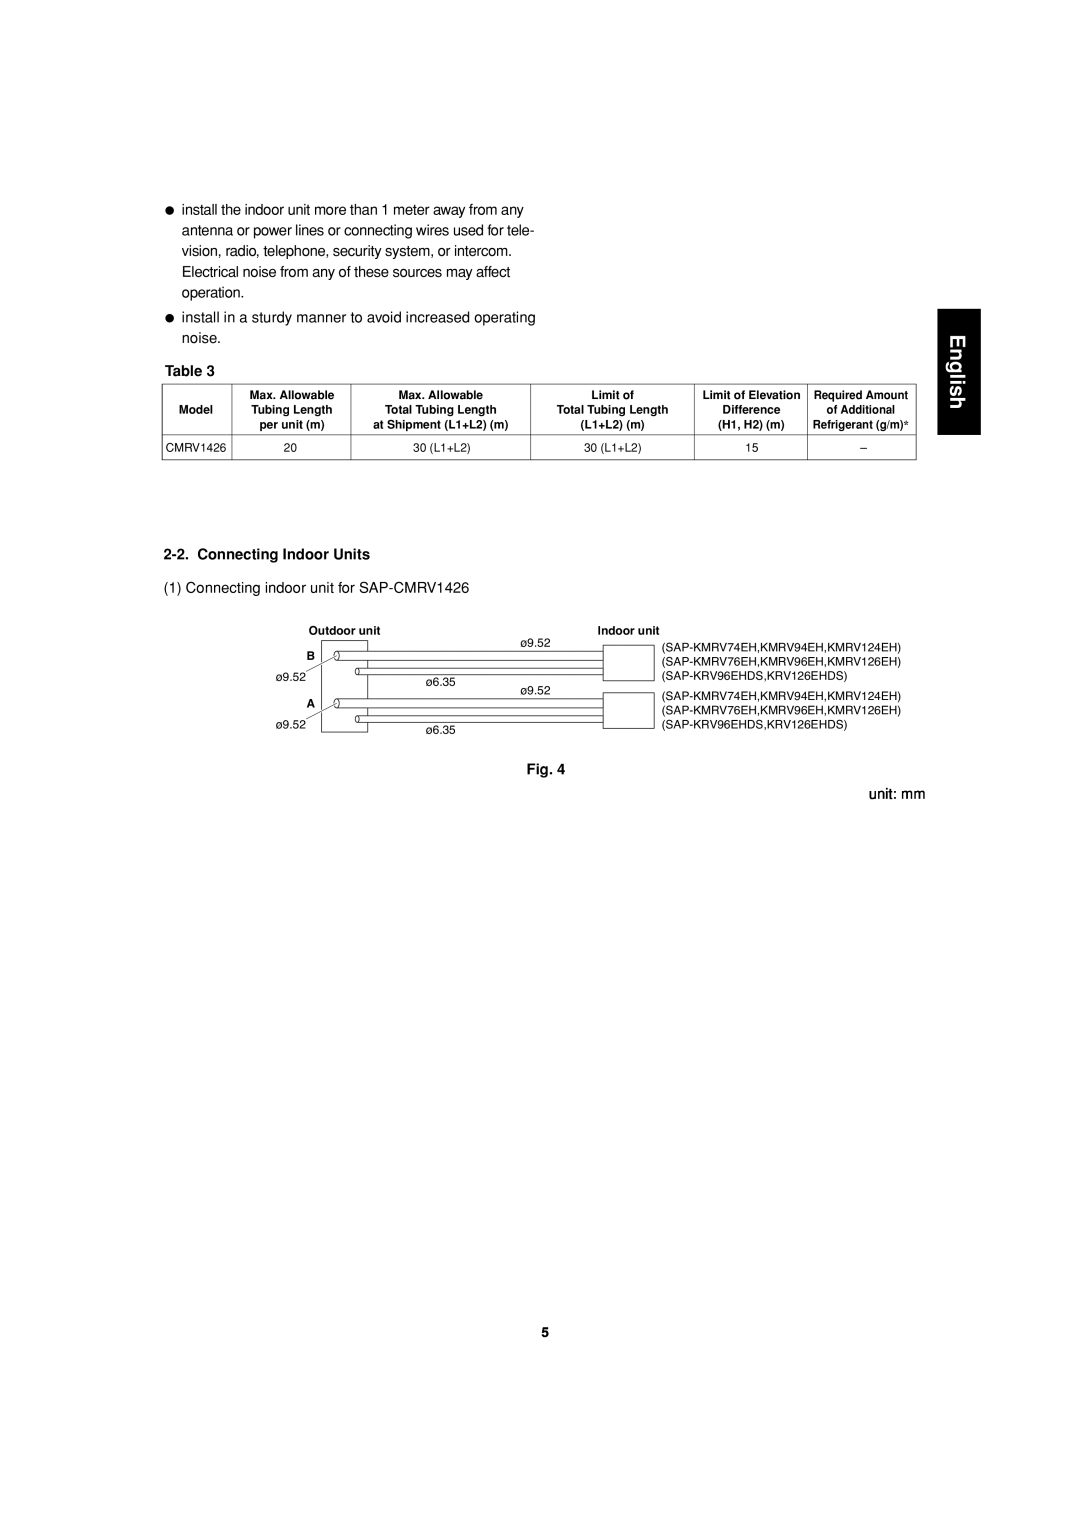 Sanyo SAP-CMRV1426EH-F, SAP-CMRV1926EH service manual English, Table, Connecting Indoor Units, Fig 